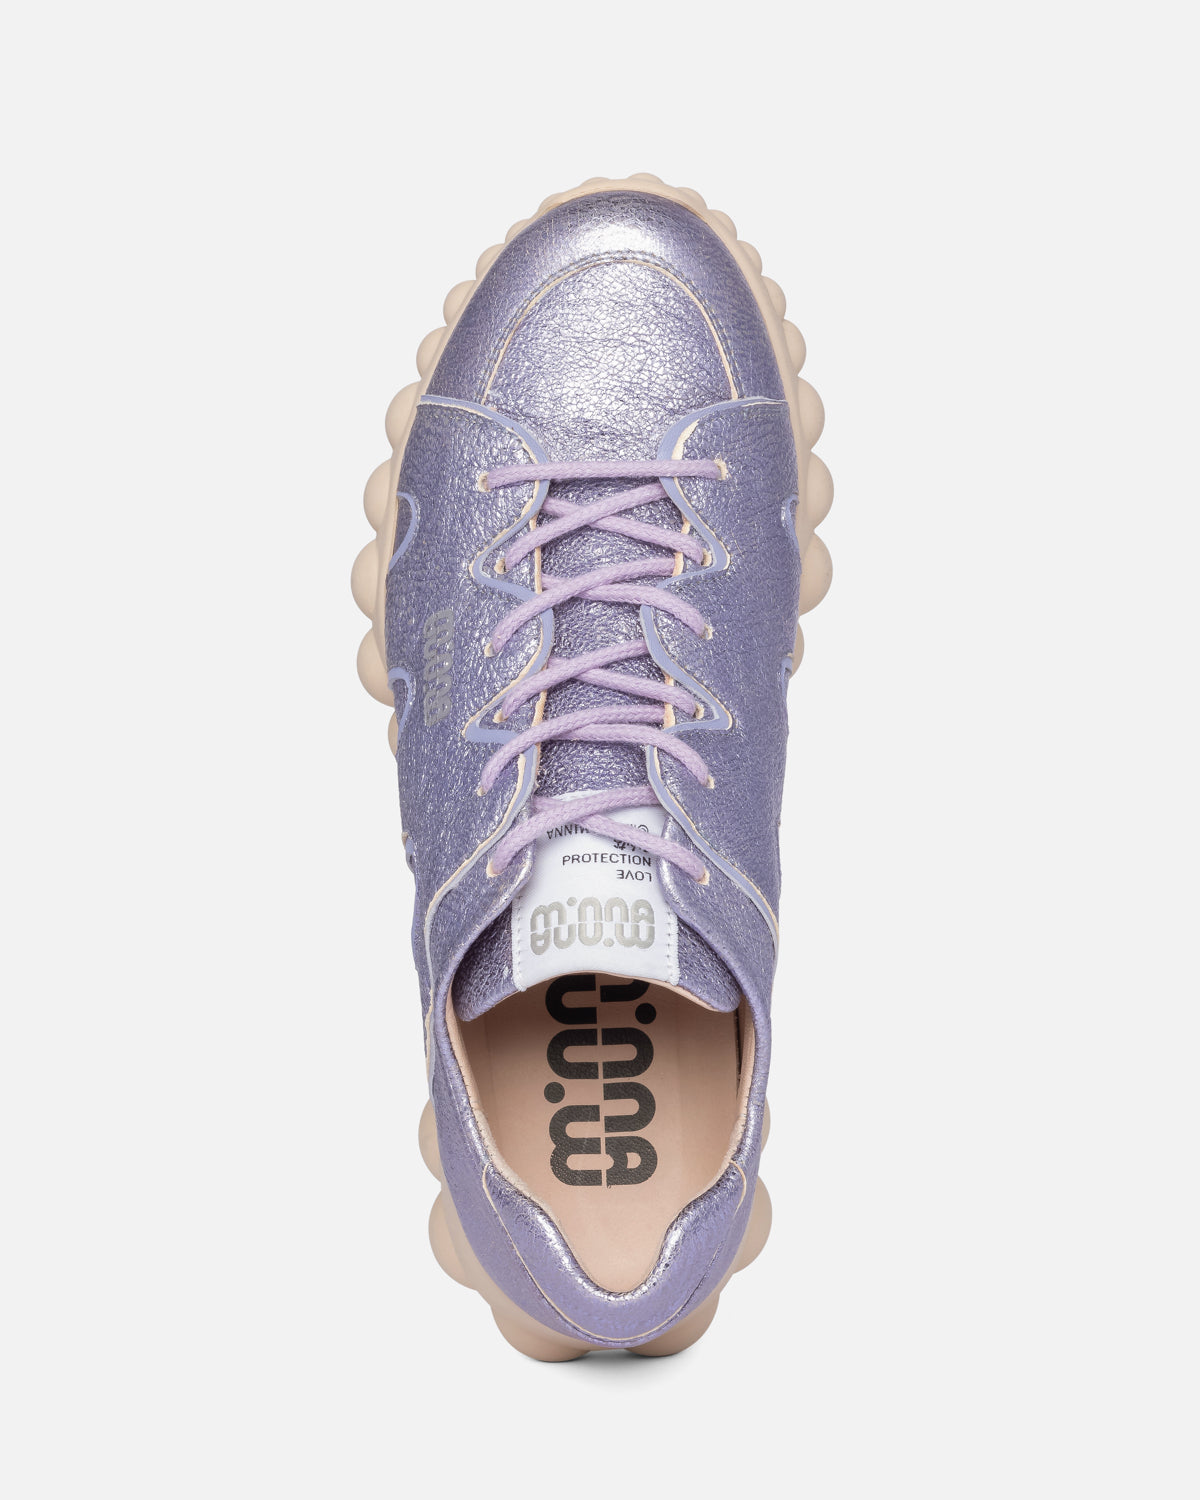 Chain Reaction Lilac Metallic Leather